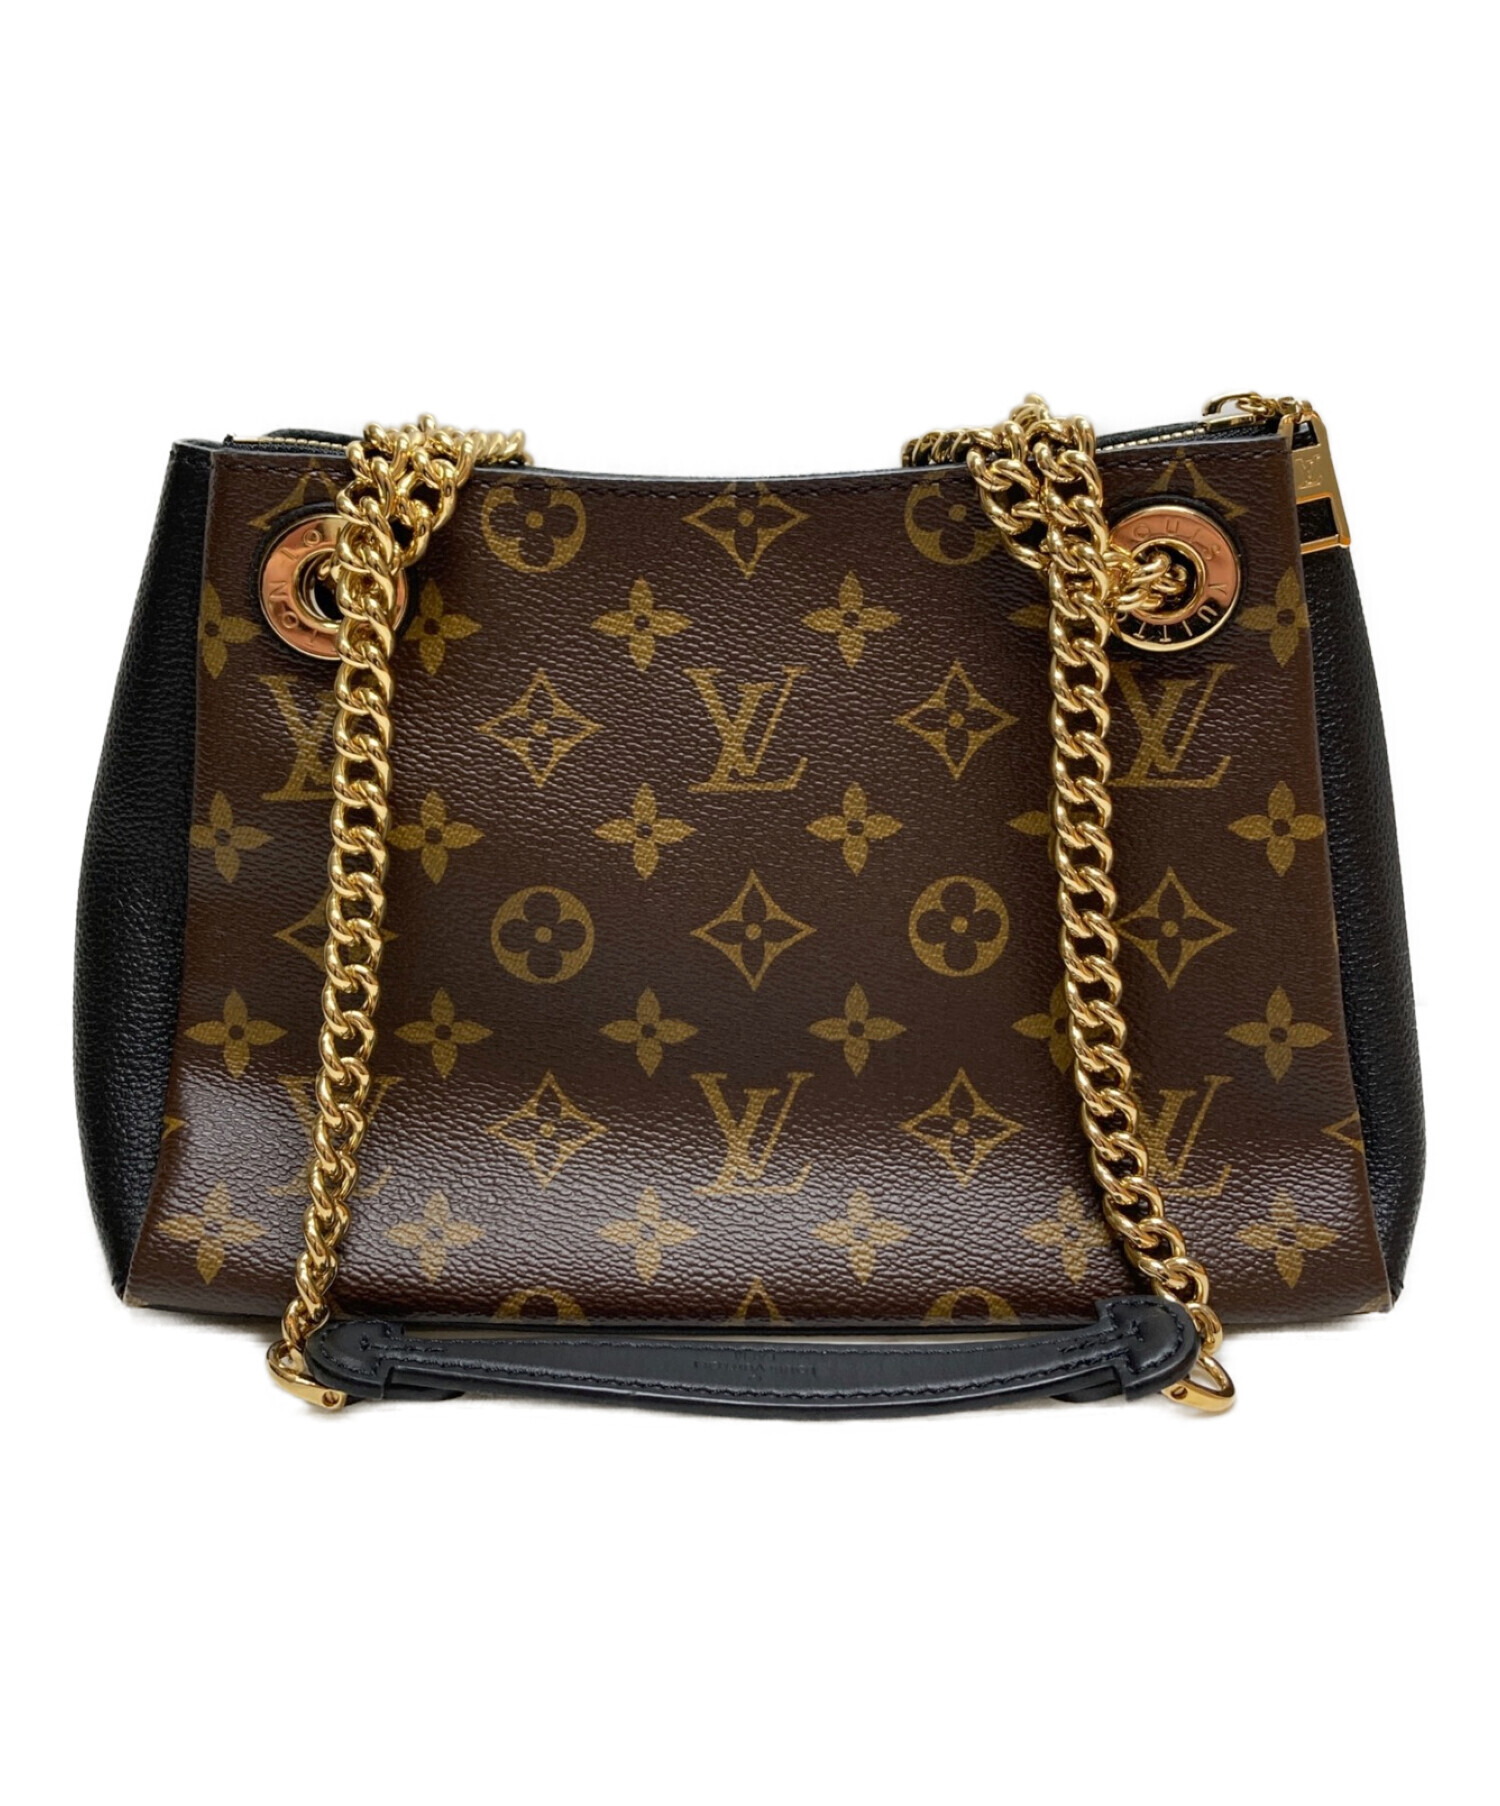 LOUIS VUITTON チェーンショルダーバッグ-